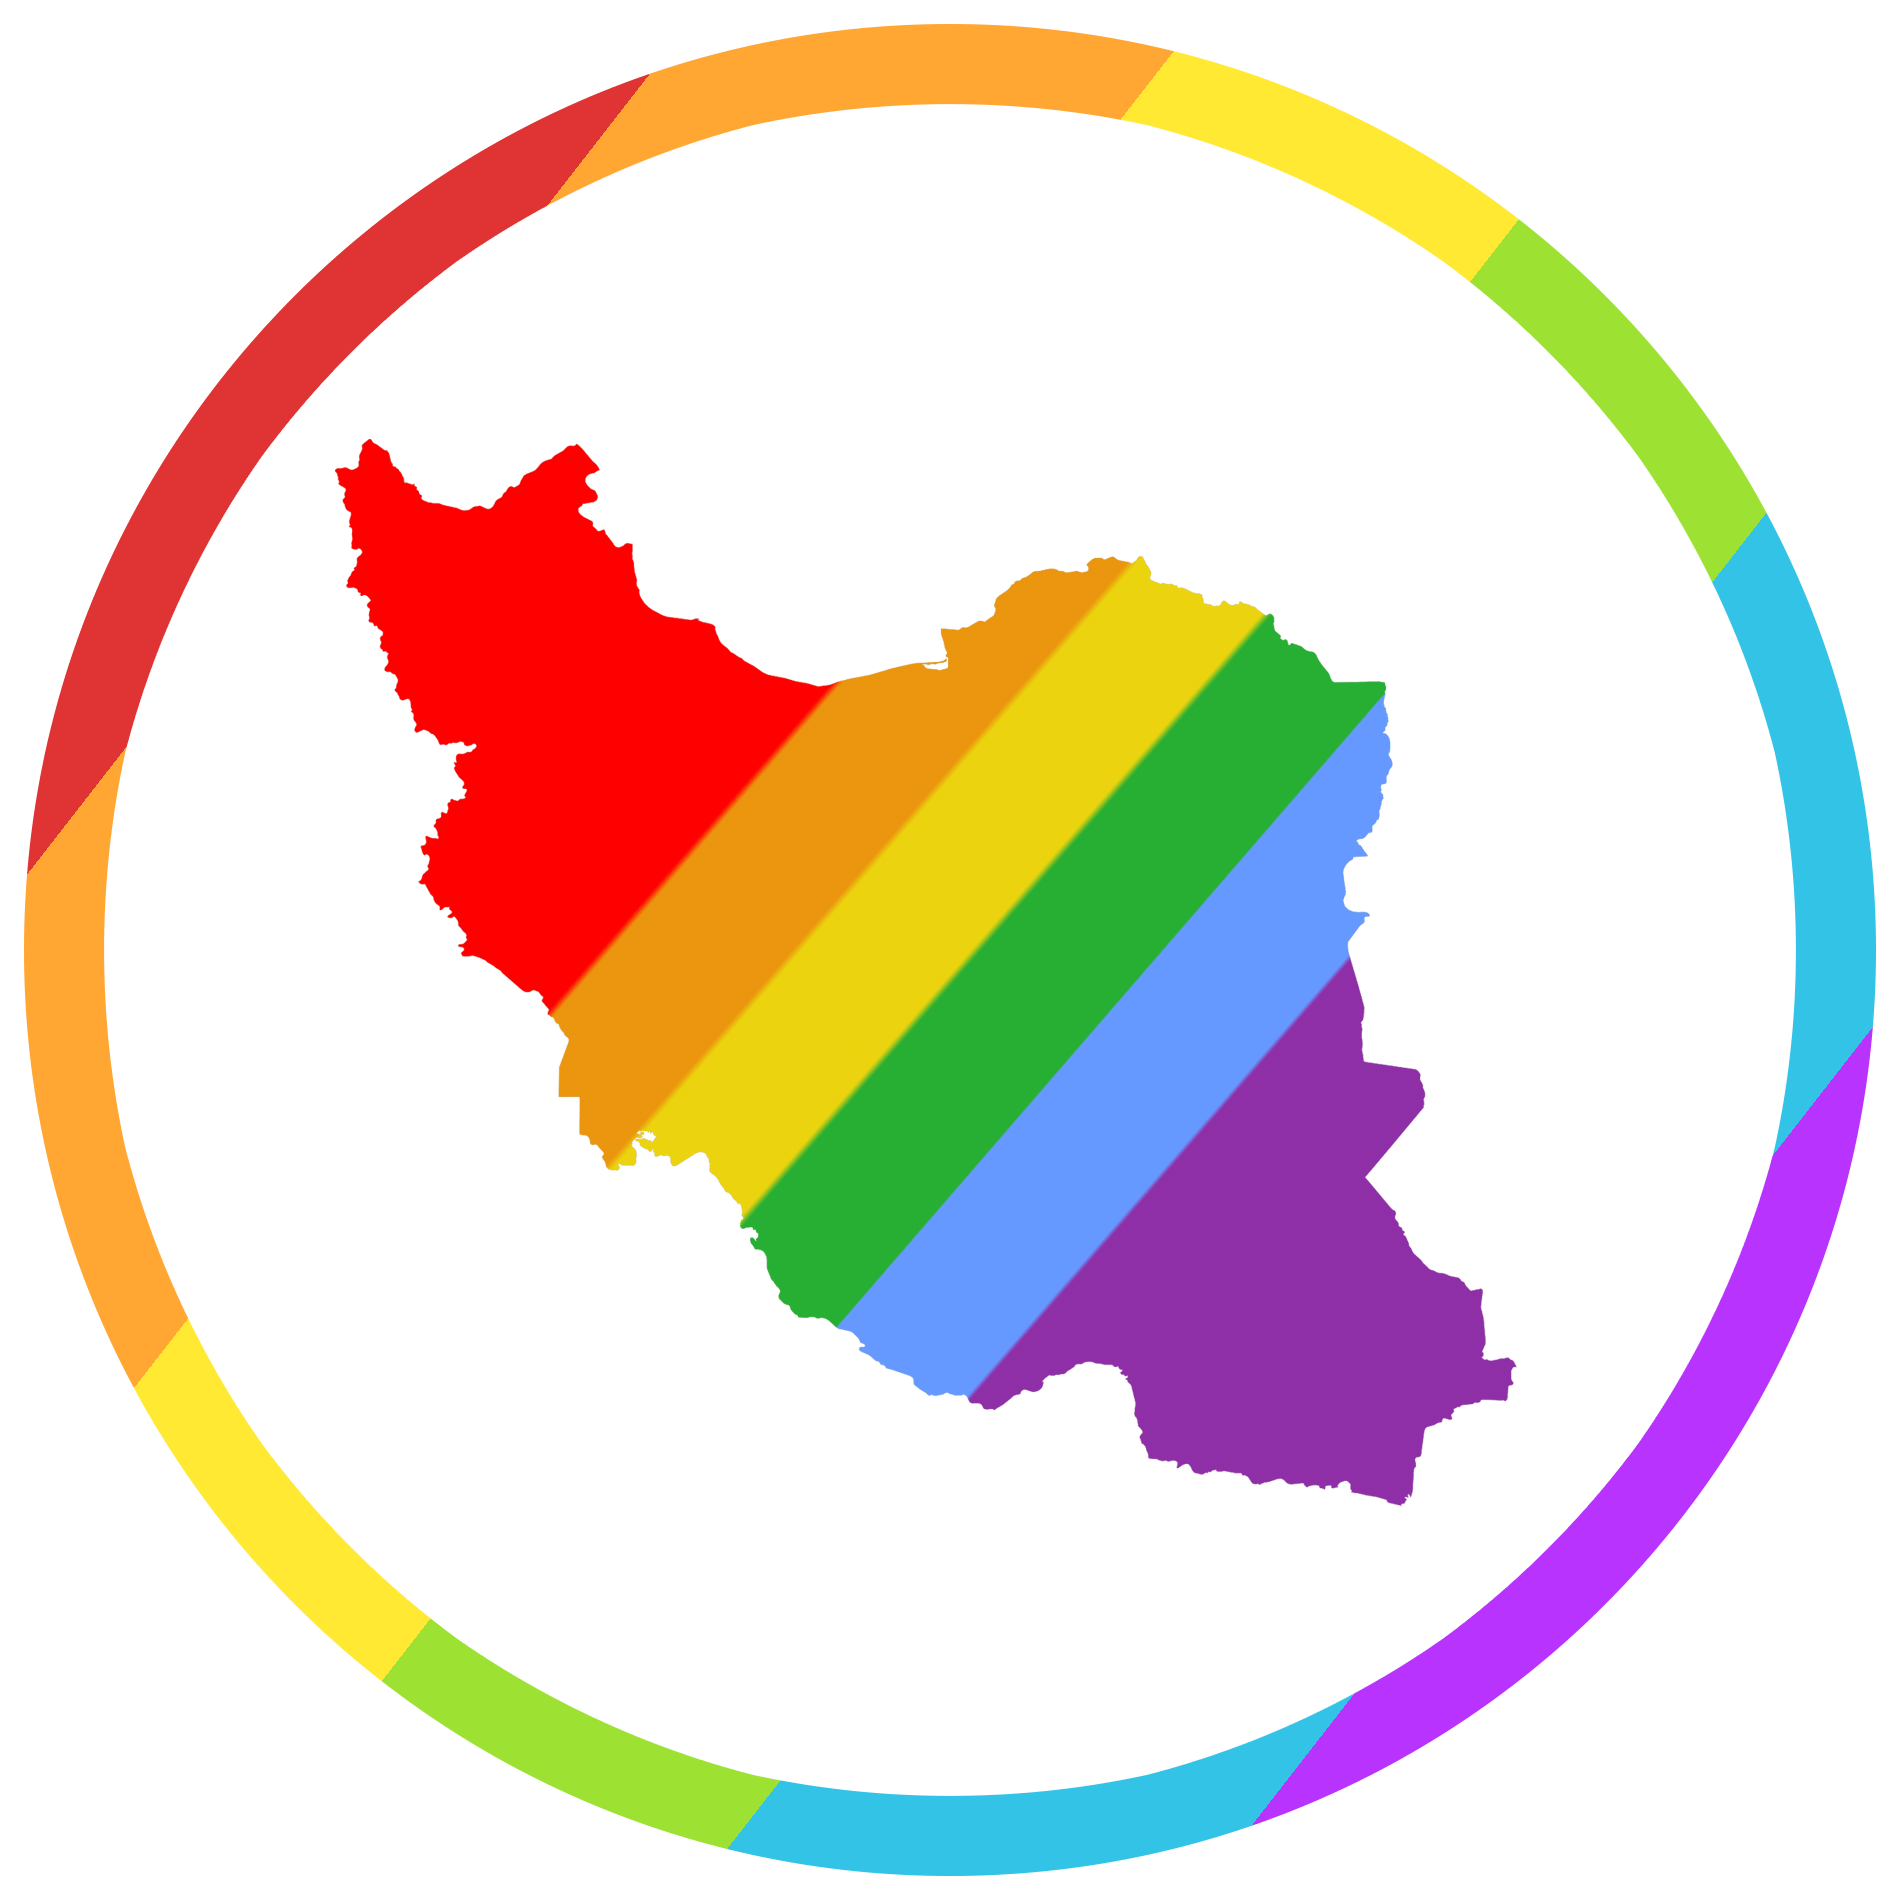 Iran Pride Logo - A circle around the map of Iran that is filled with rainbow flag colors